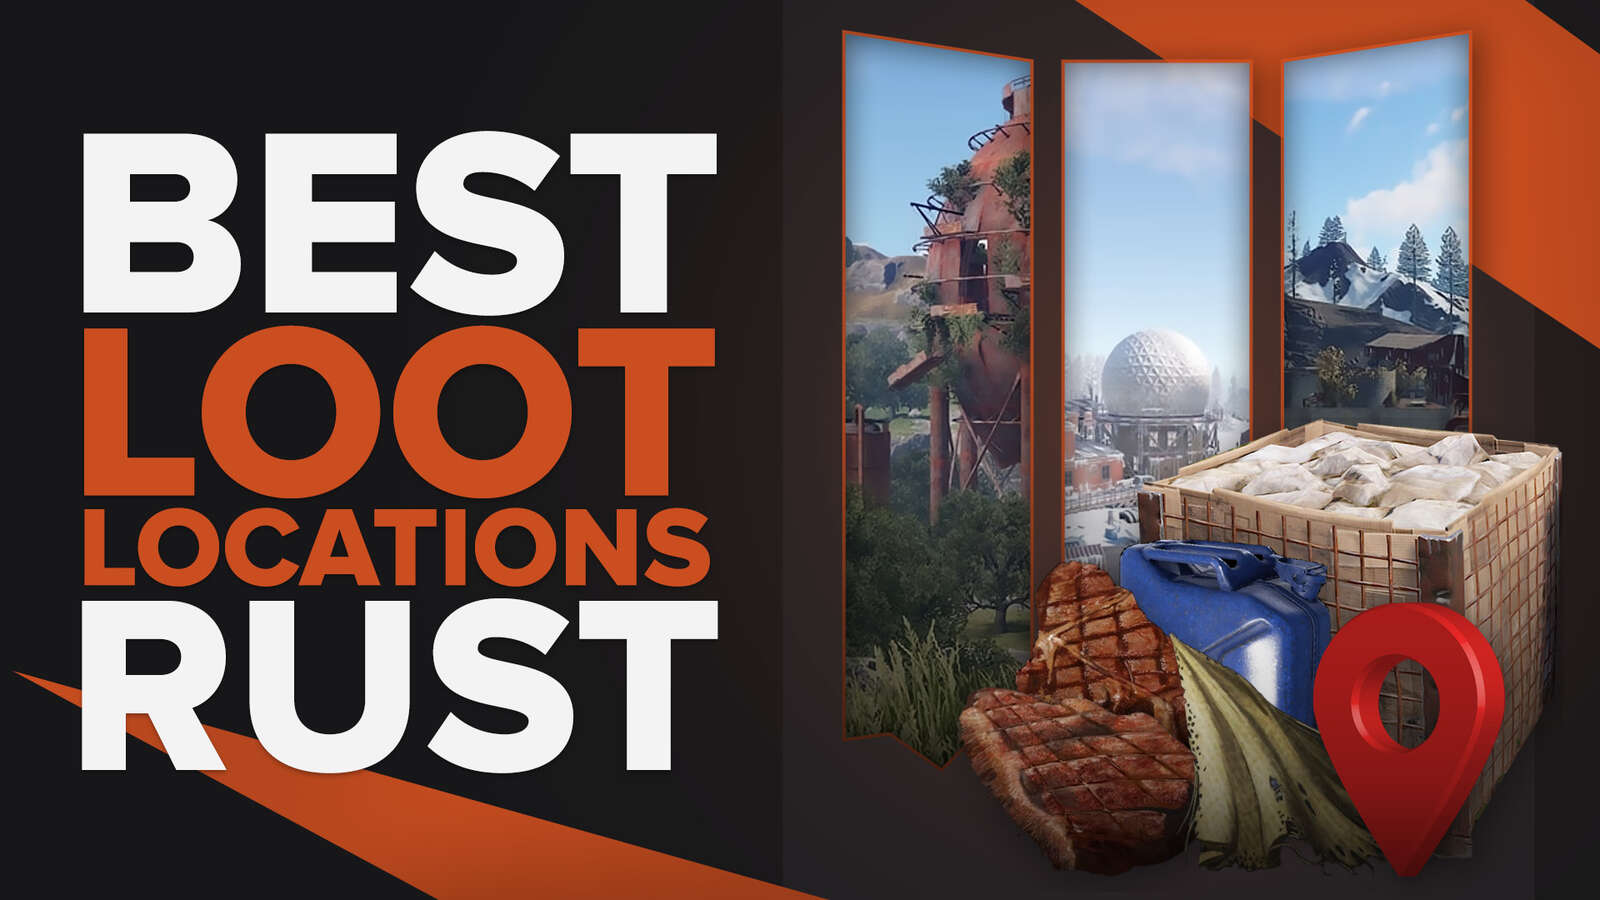 Top 8 Best Monuments to Loot in Rust